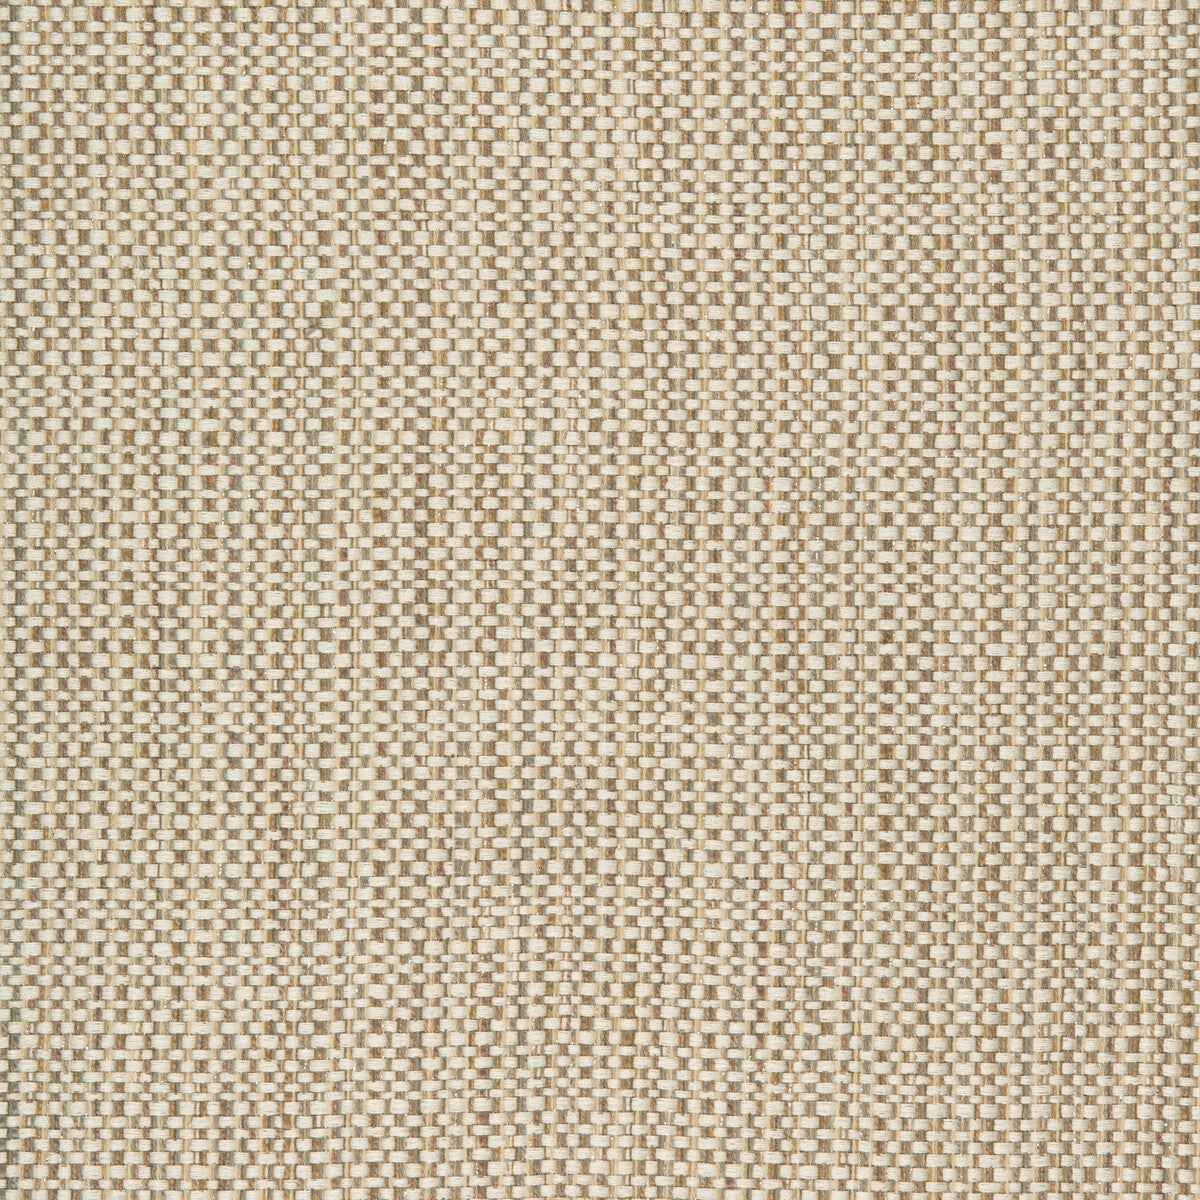 Kravet Contract fabric in 34746-611 color - pattern 34746.611.0 - by Kravet Contract in the Incase Crypton Gis collection